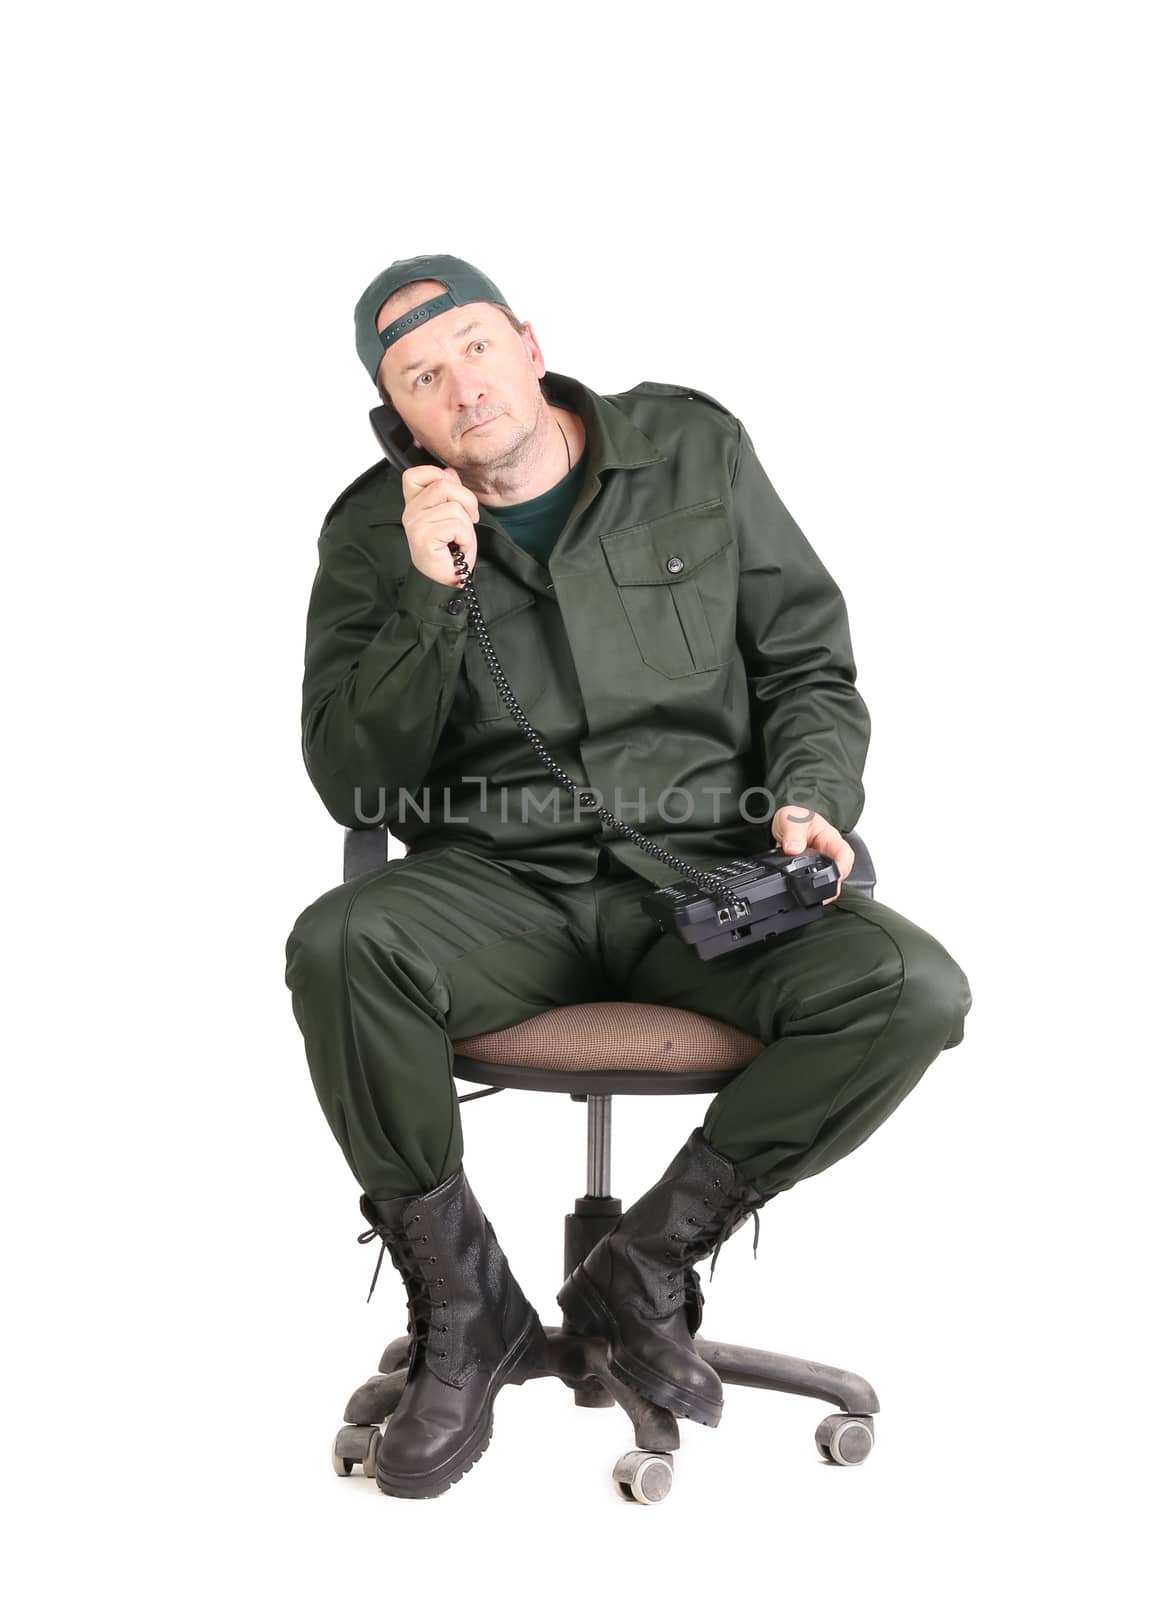 Worker talking on the phone. Isolated on a white background.